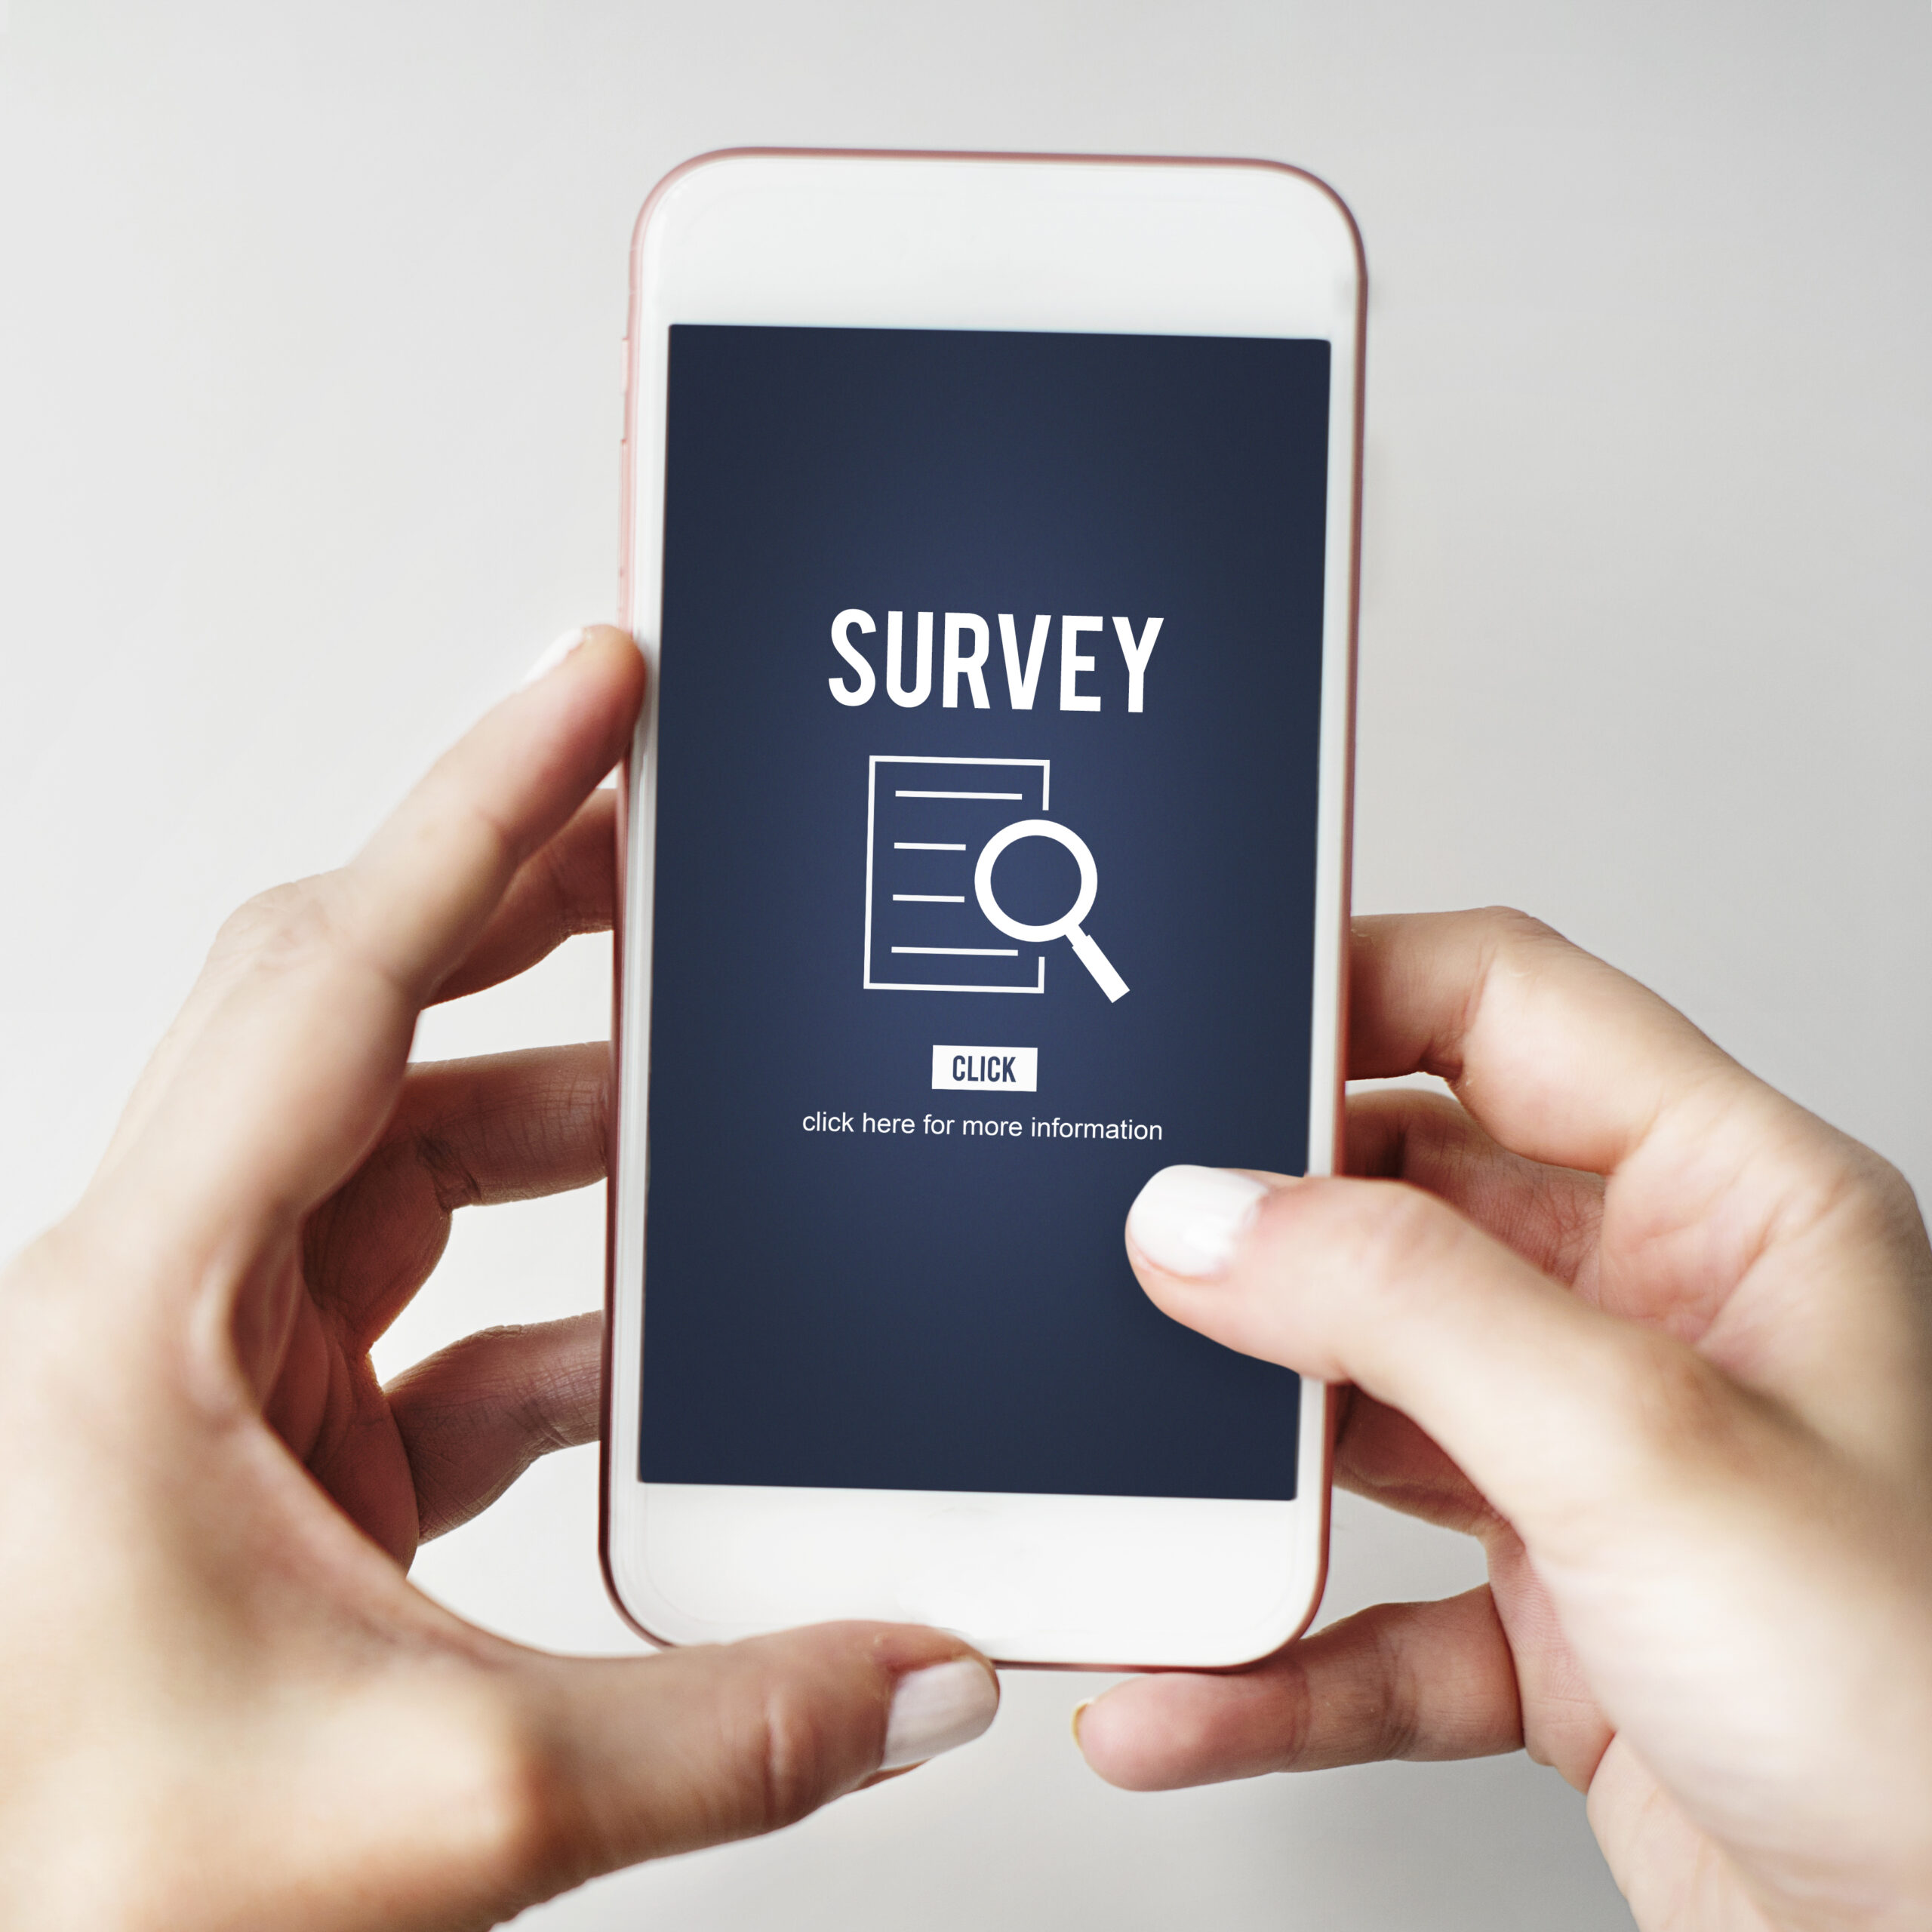 Image of a smart phone showing a survey